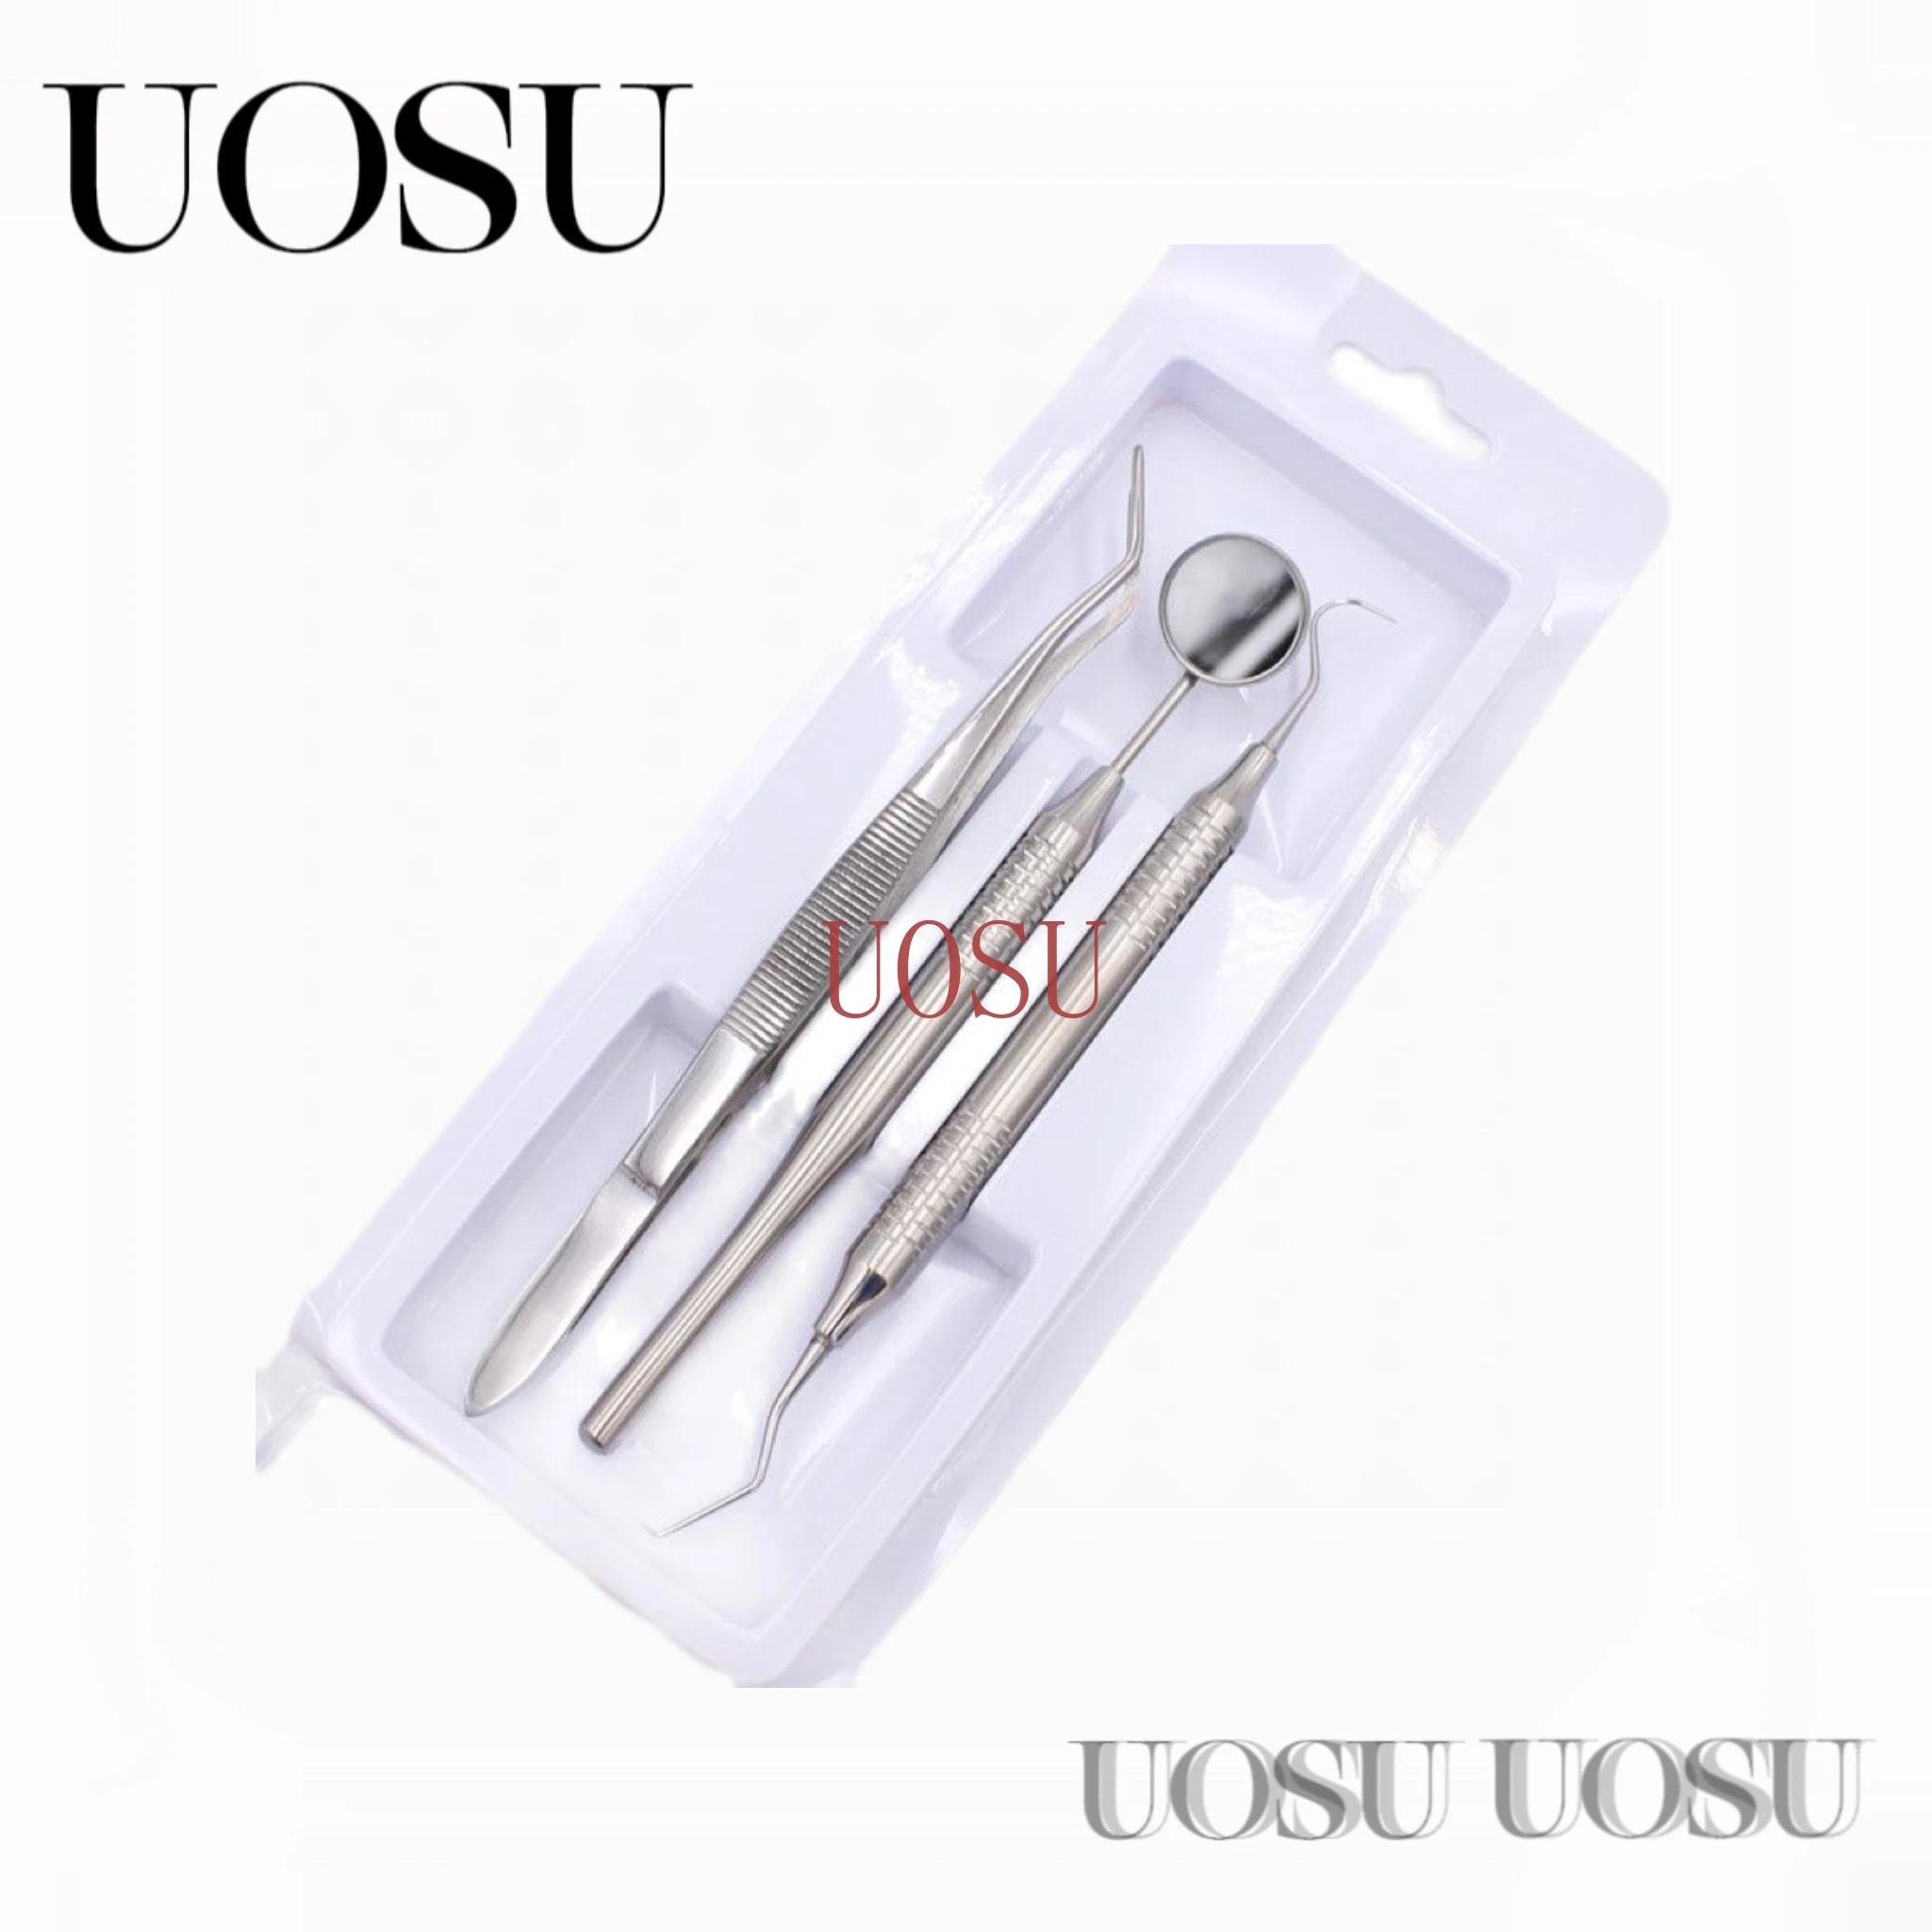 

3Pcs Dental Mouth Mirror Stainless Steel Tweezers Elbow Probe Dentist Instrument Teeth Cleaning Whitening Dentistry Tools Set